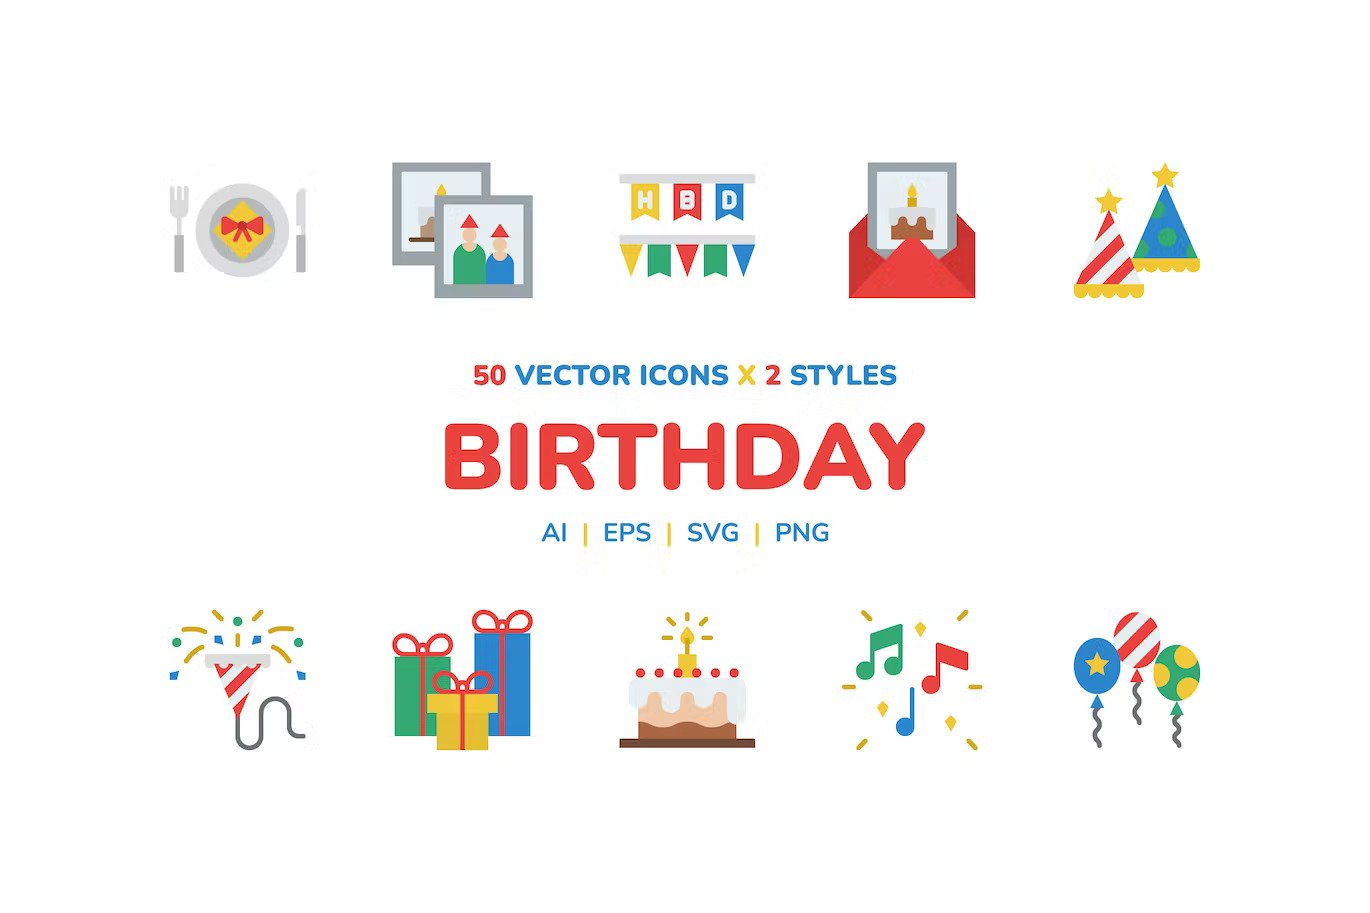 A colorful birthday party icon set